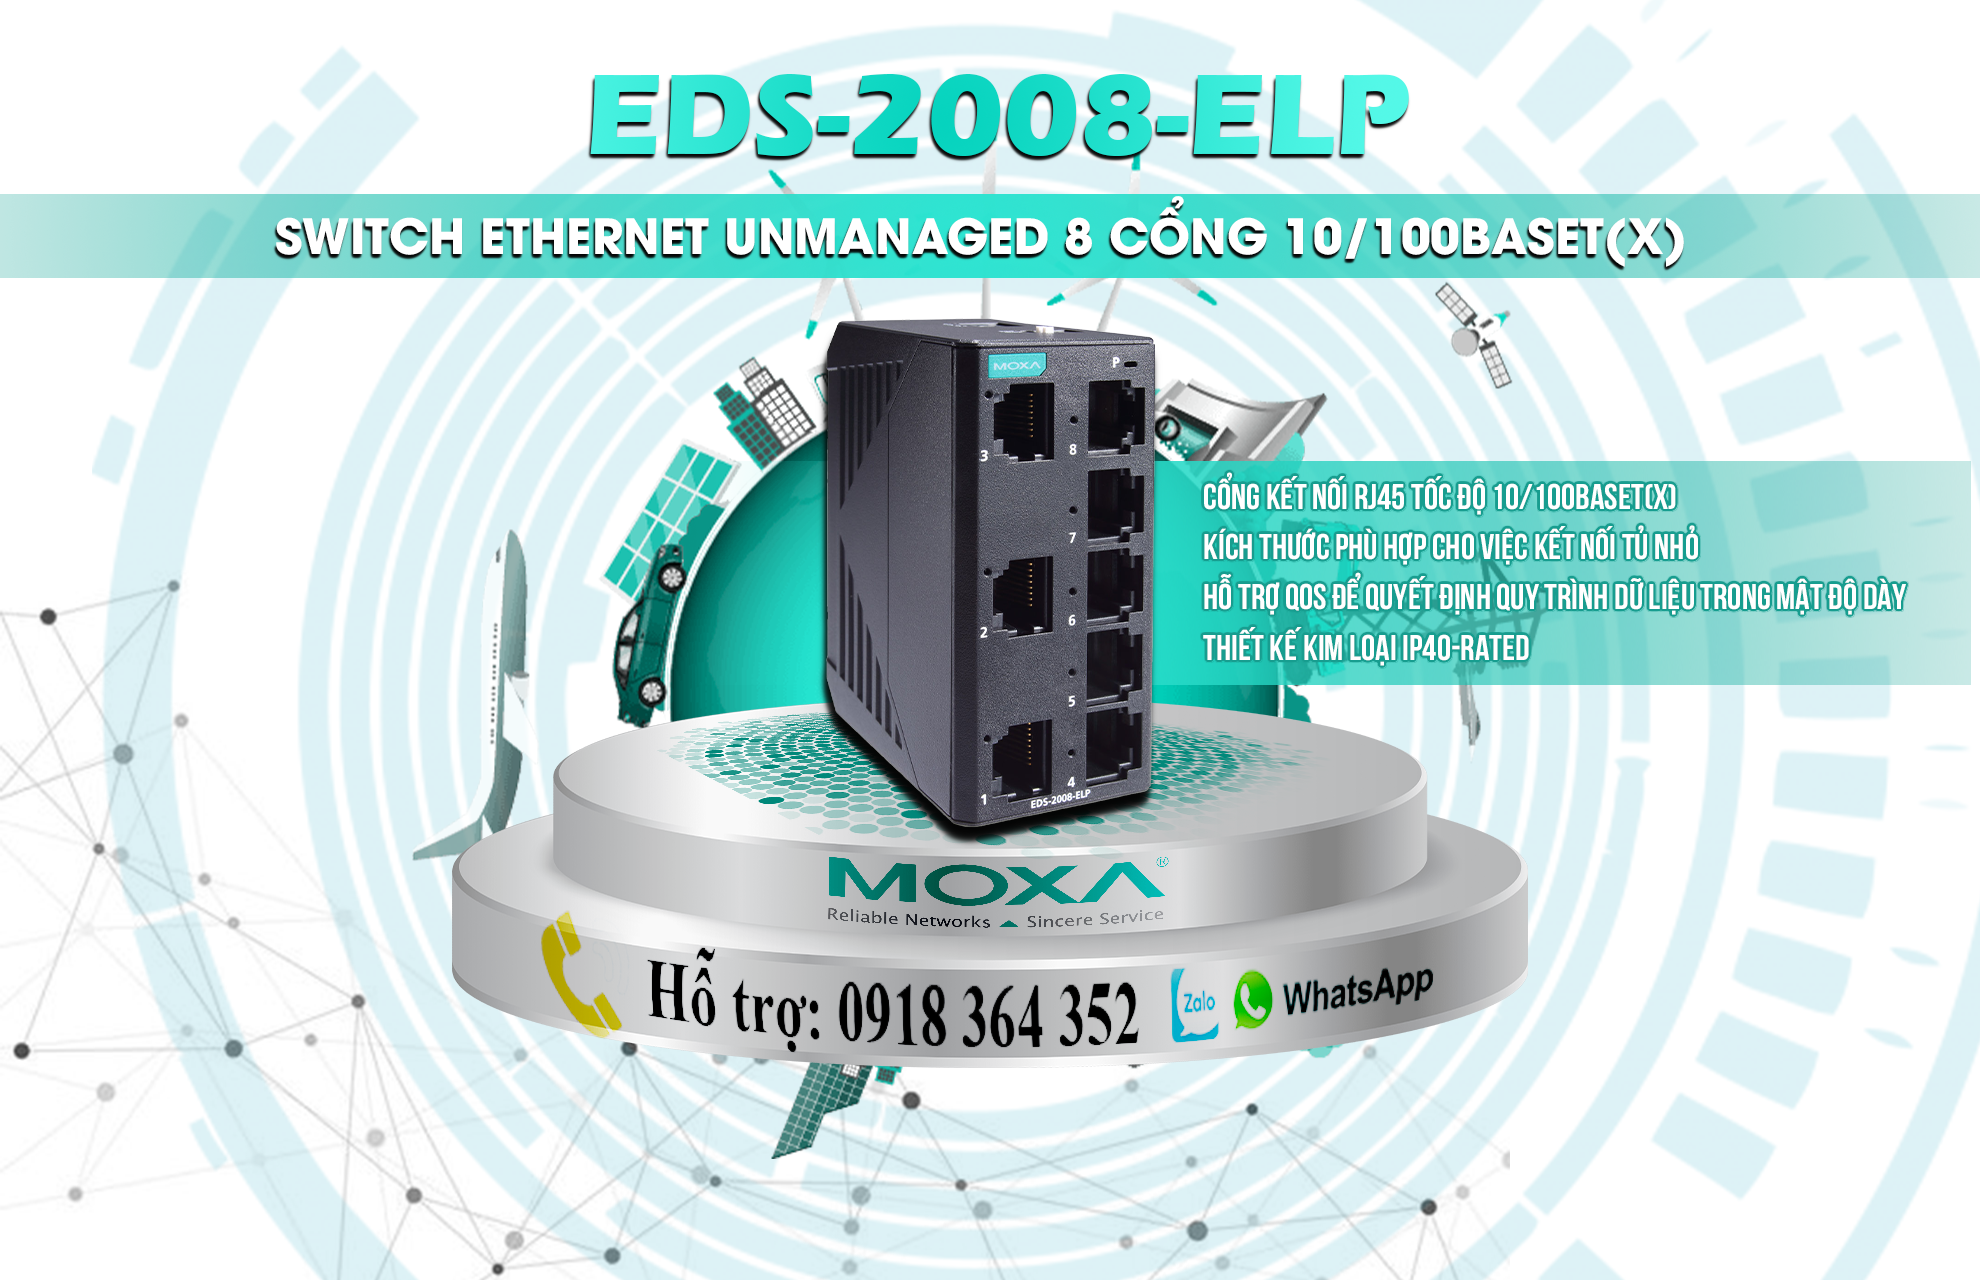 eds-2008-el-m-st-switch-ethernet-managed-8-cong-10-100baset-x-dai-ly-switch-mang-cong-nghiep-moxa-viet-nam.png